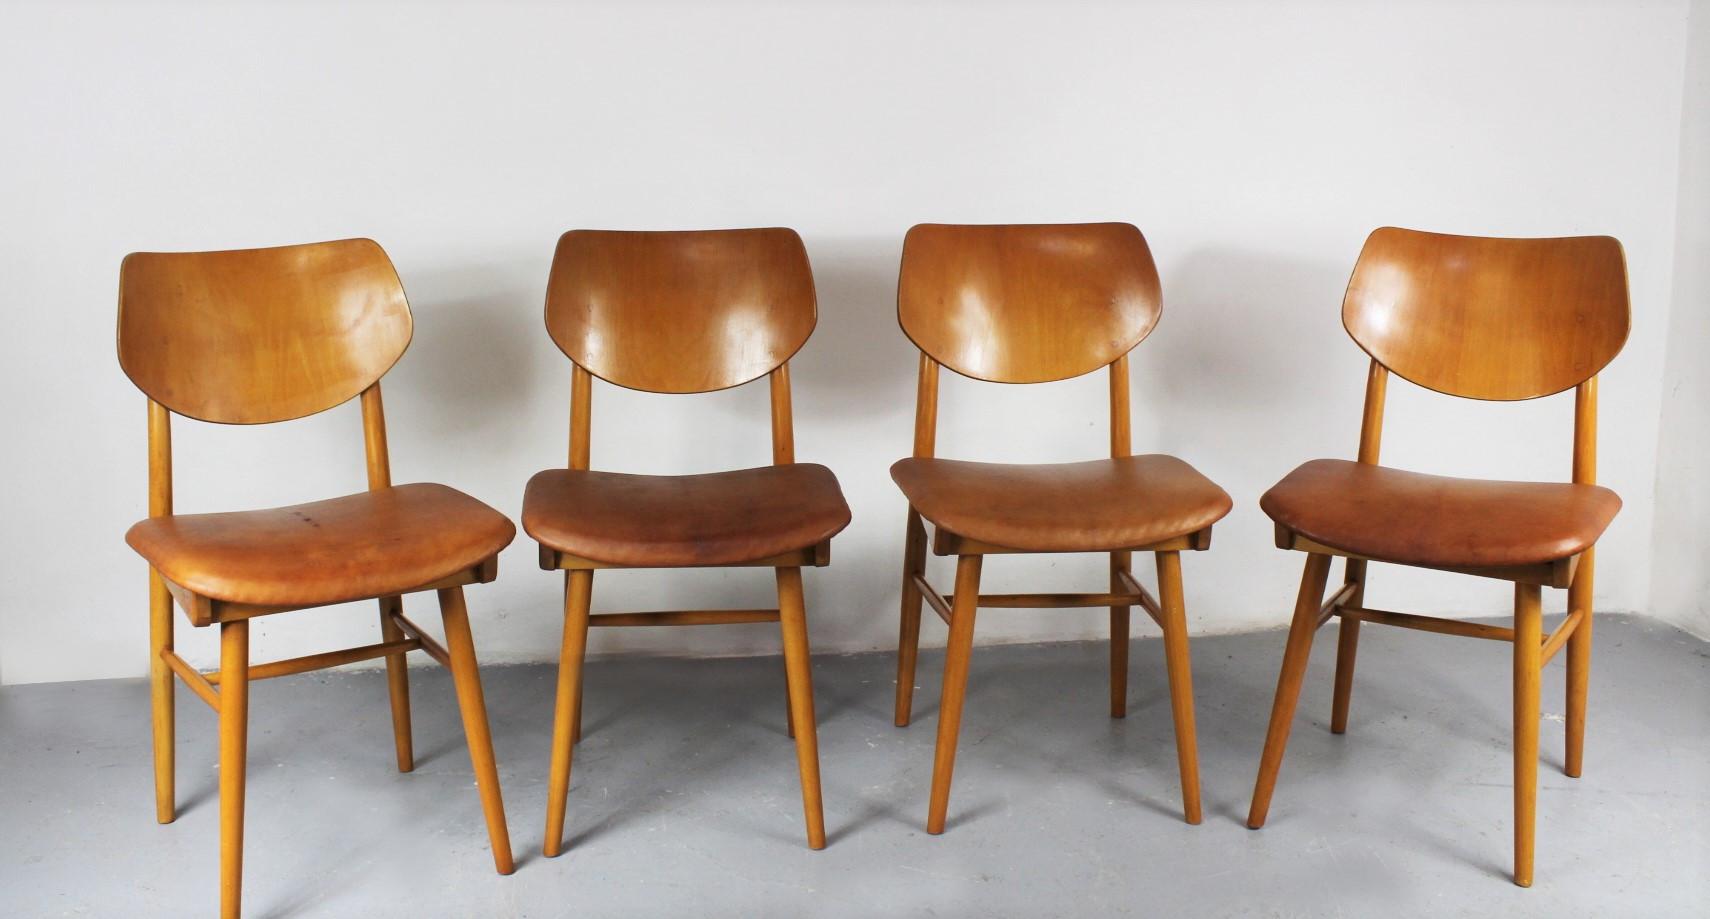 Set of four chairs from the 1960, manufactured by Ton and Jitona. The seats have been reupholstered in goat leather. Good condition, nice patina.